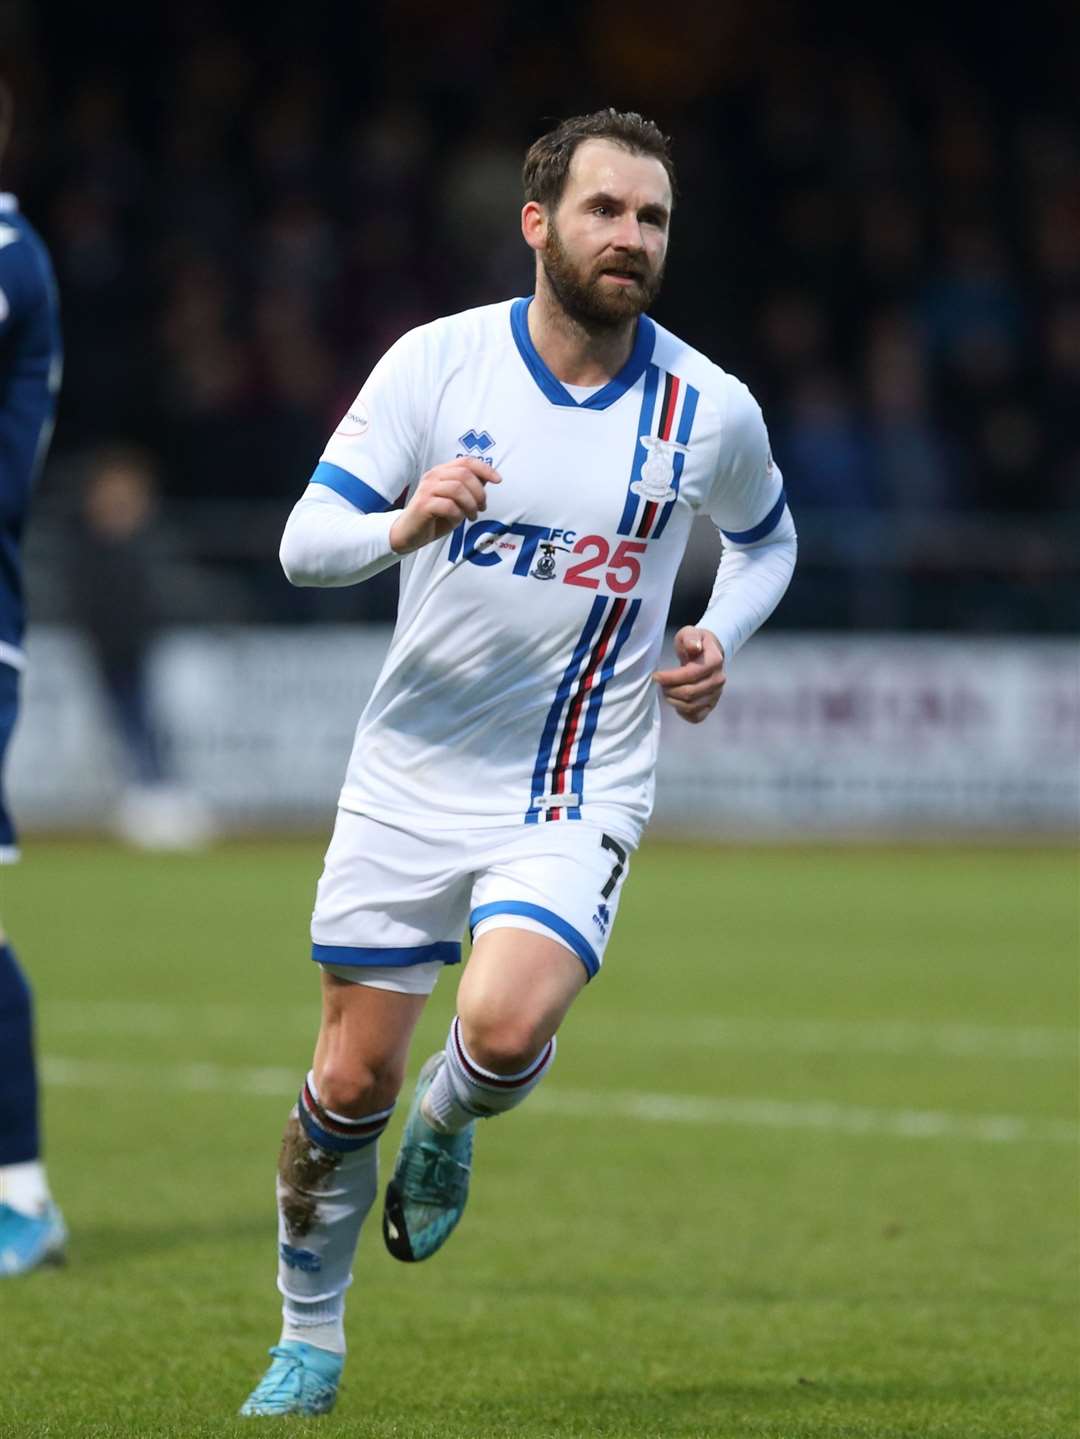 James Keatings scored the equaliser but was sent off in the second half.